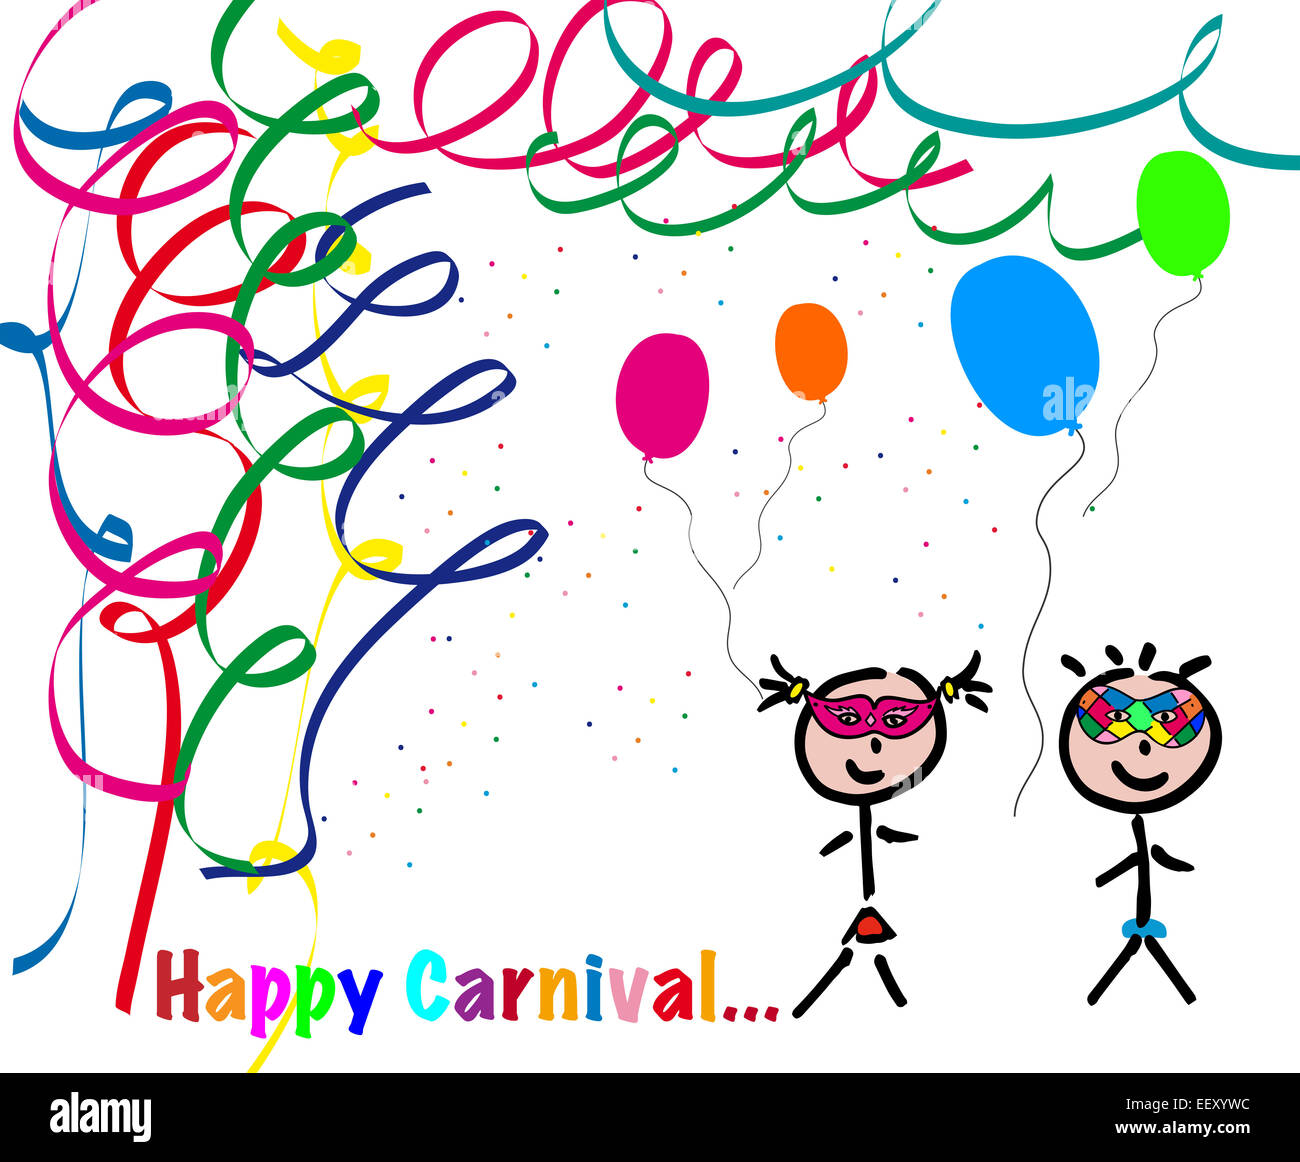 happy carnival, two children, boy and girl with masks, streamers and confetti Stock Photo